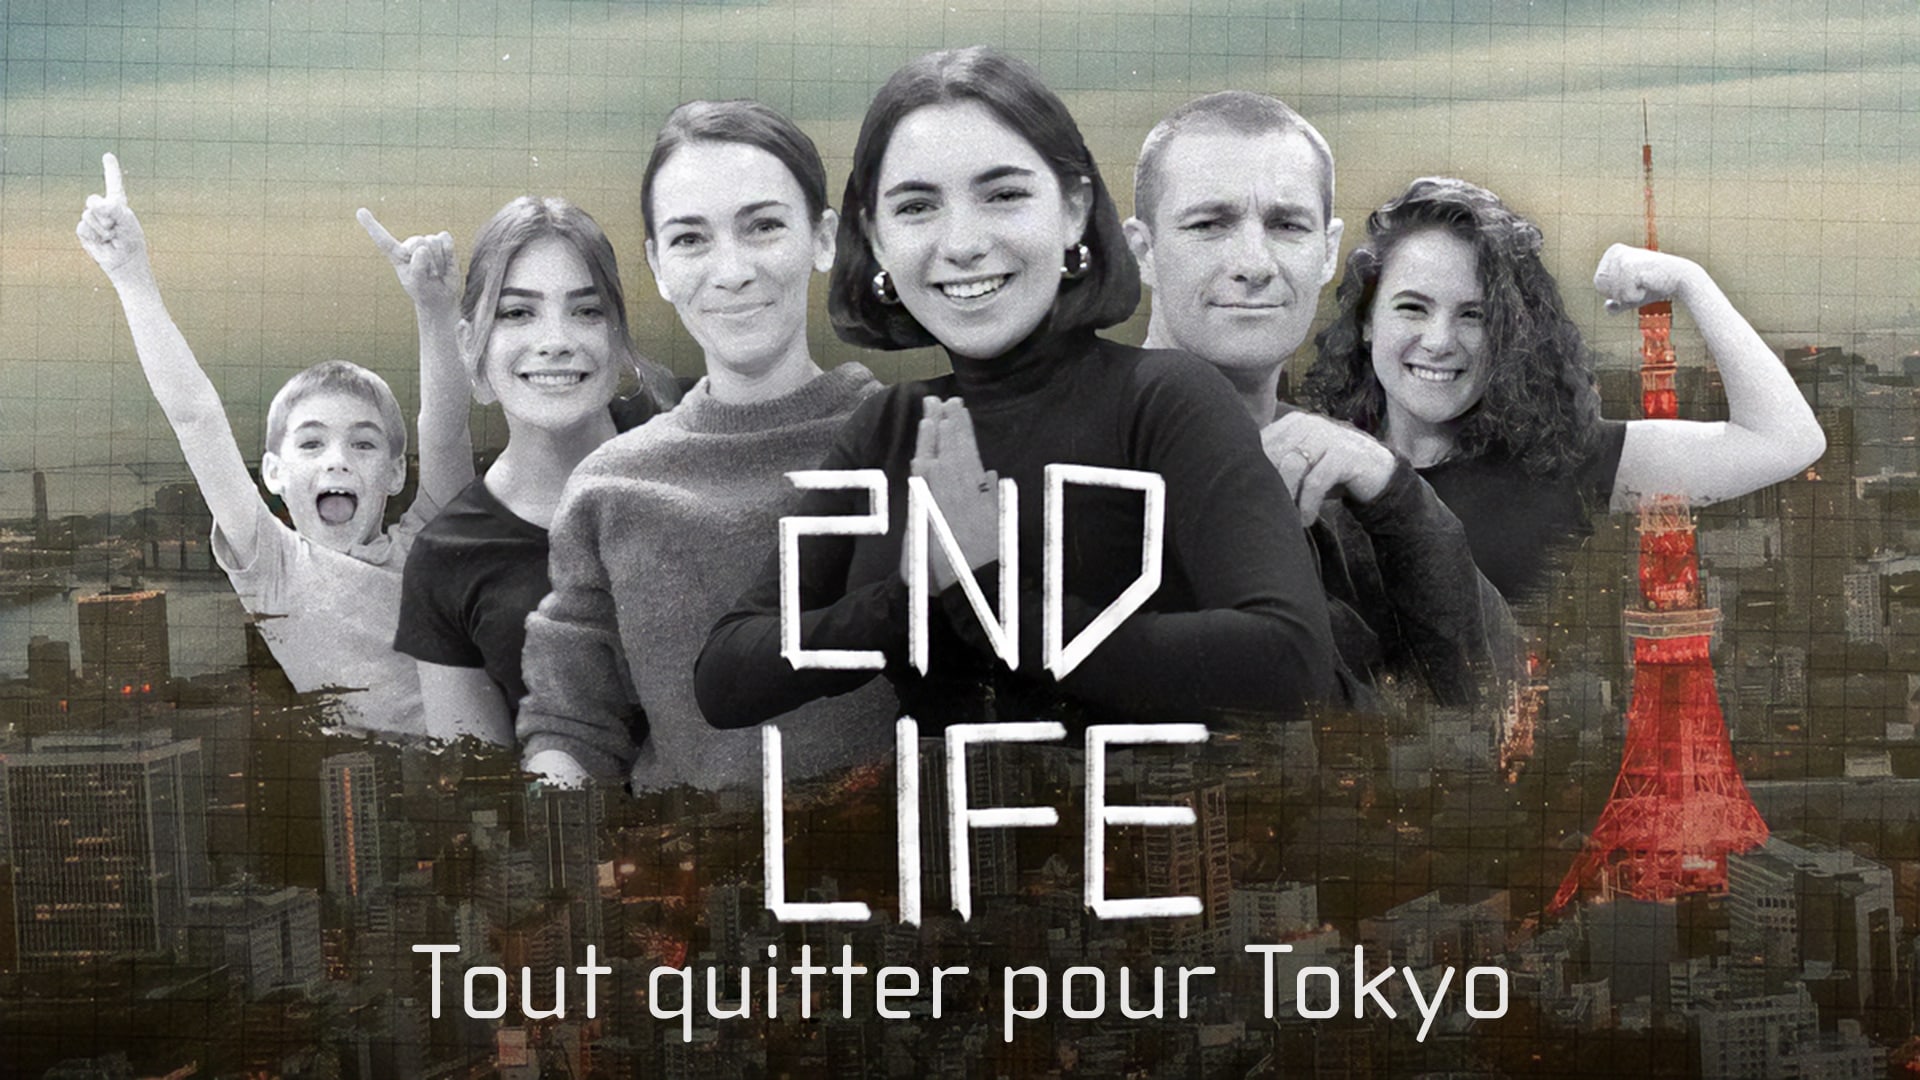 2nd Life - Tout quitter pour Tokyo